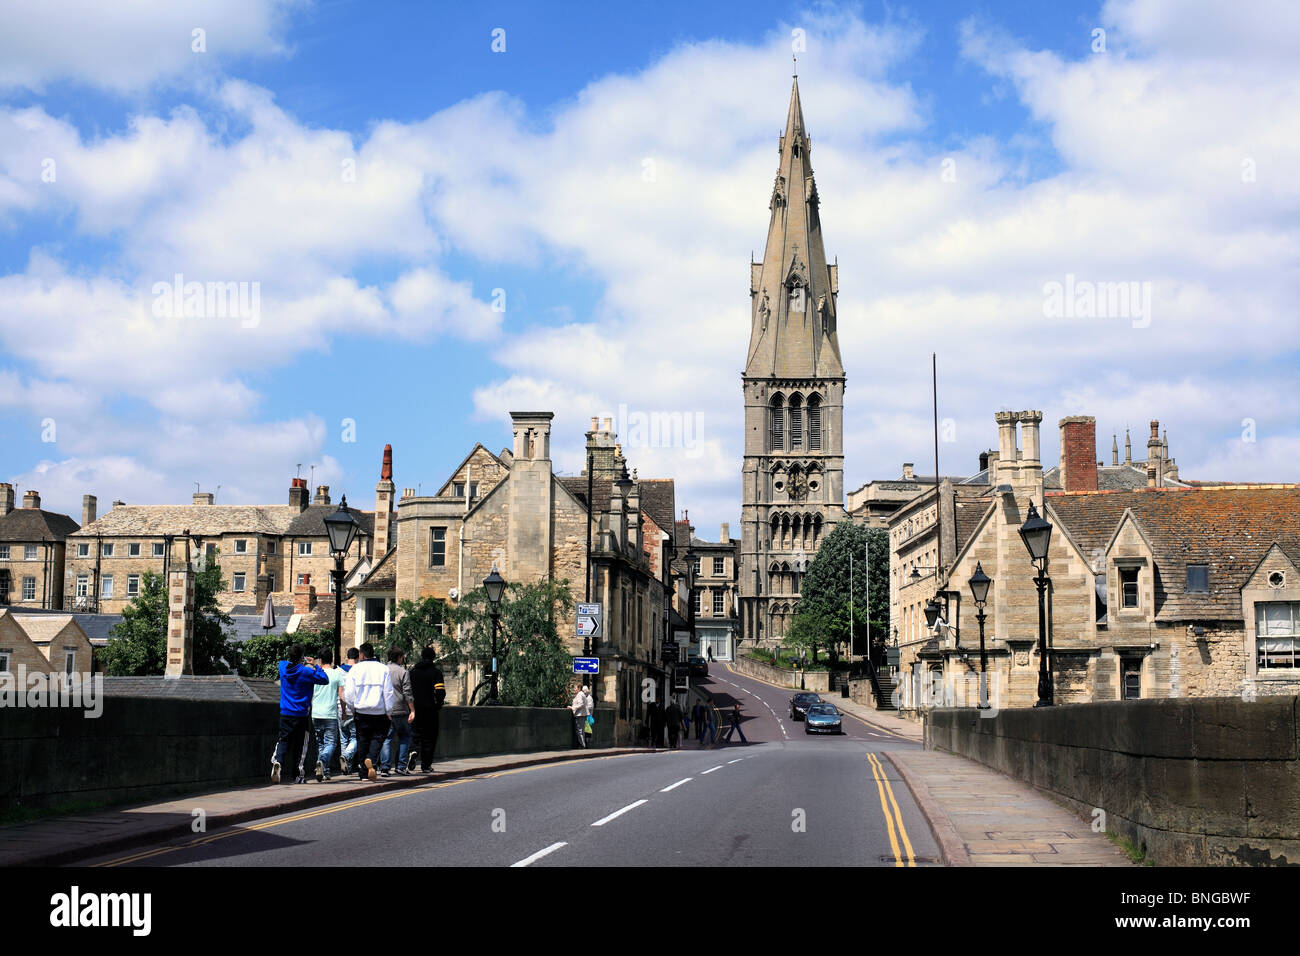 View of the approach to Stamford town centre, looking across the R. Welland bridge along St. Mary's Hill, with St.Mary's Church ahead. Stock Photo